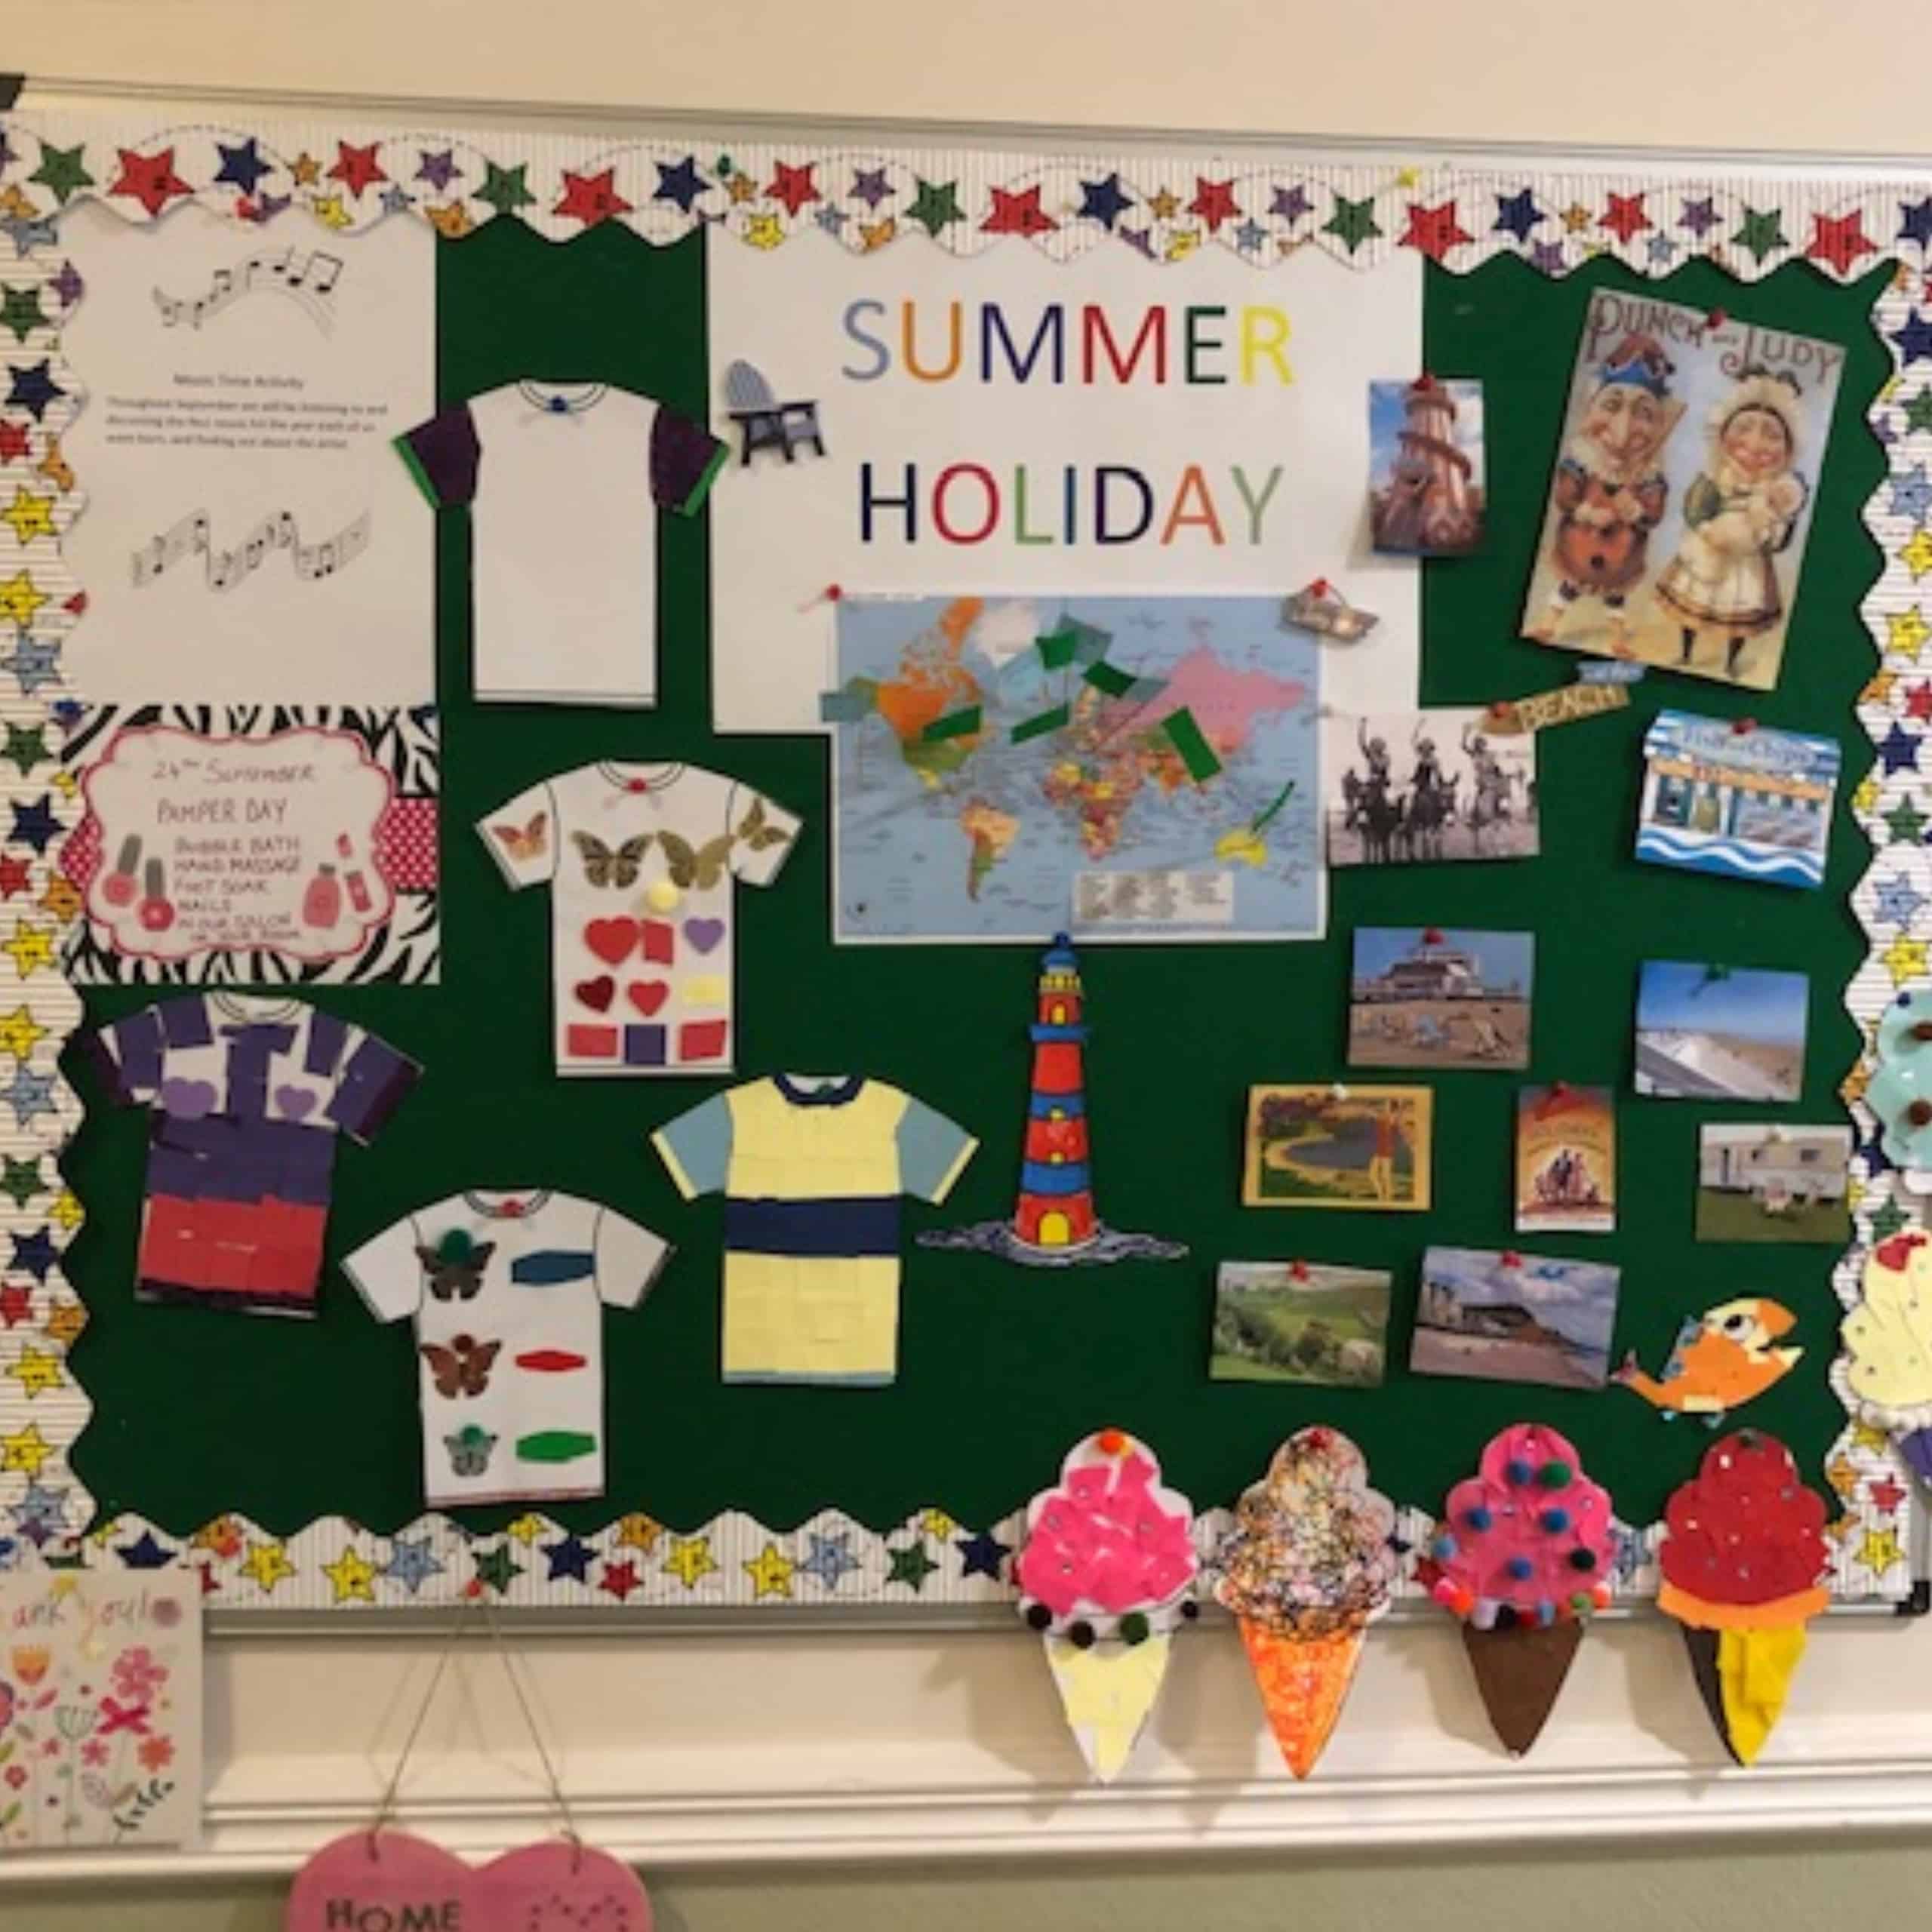 The 'Summer Holiday' memory board at Westerham Place Care Home in Sevenoaks.